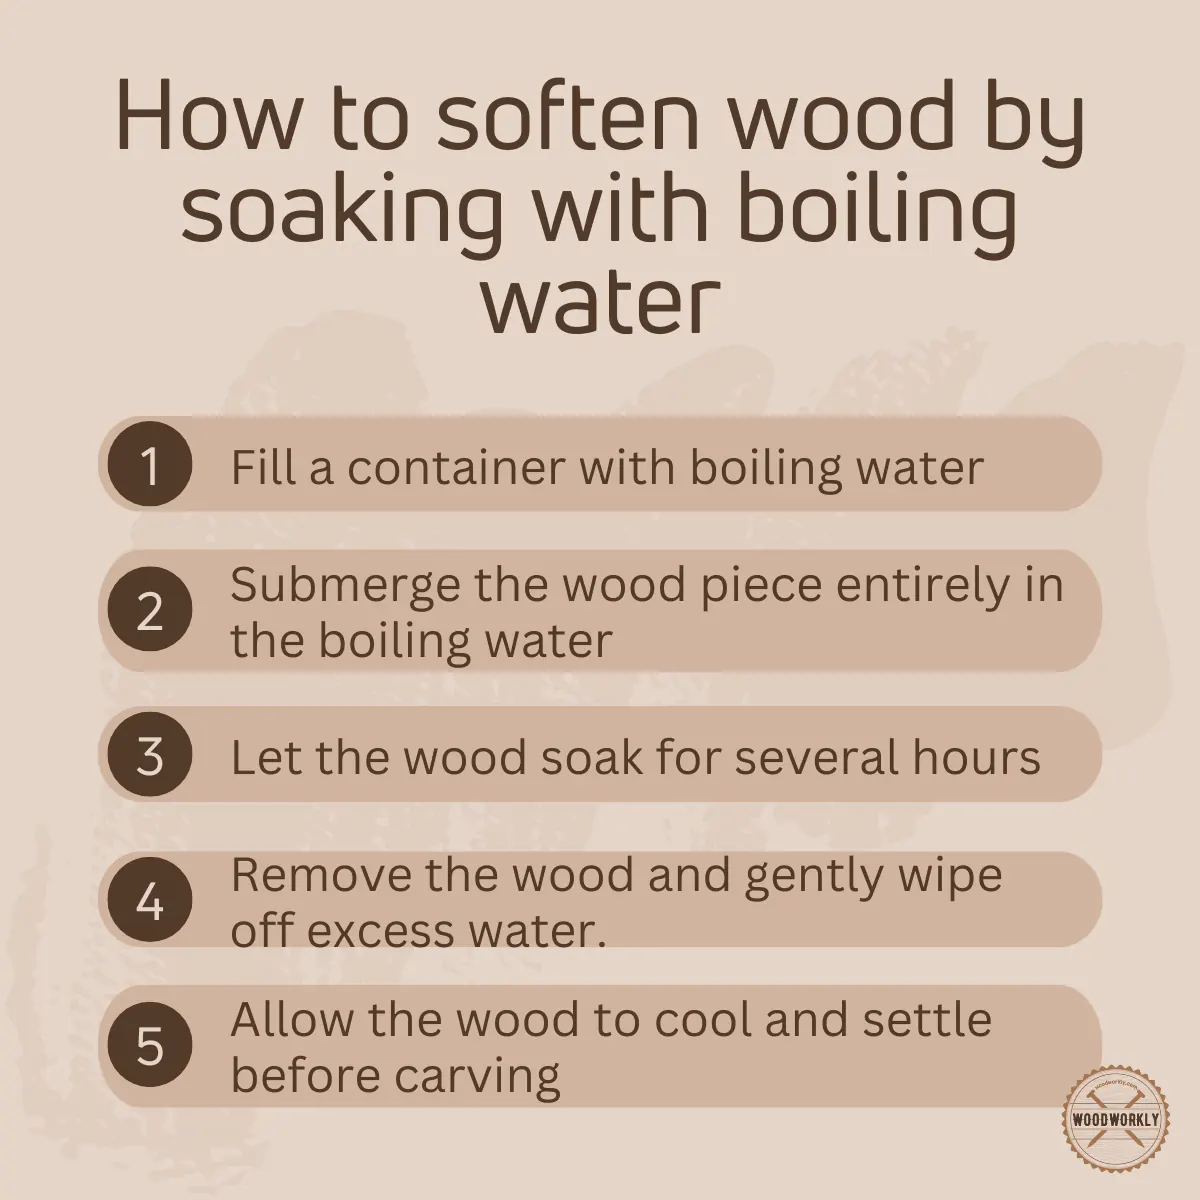 How to soften wood by soaking with boiling water